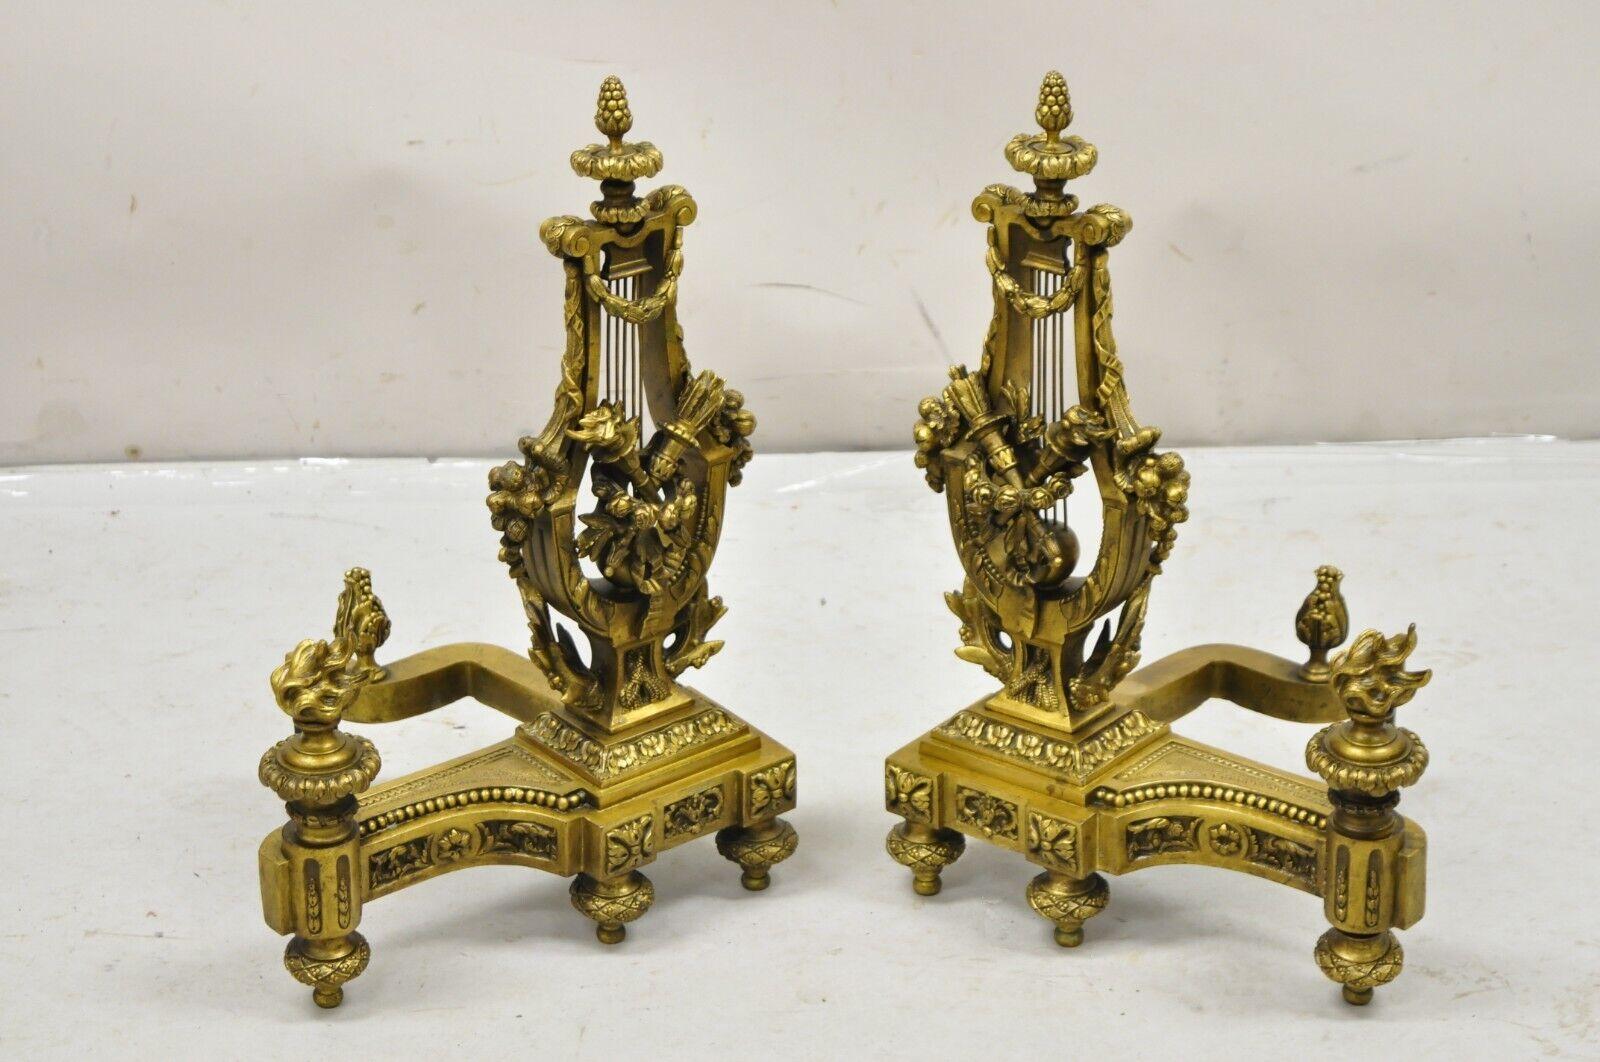 Antique French Empire Neoclassical Style Bronze Figural Lyre Harp Andirons - a Pair. Item featured has a remarkable cast bronze detail with flame and torch accents, floral drapes, central harp form, very nice antique pair. Circa Early 1900s.